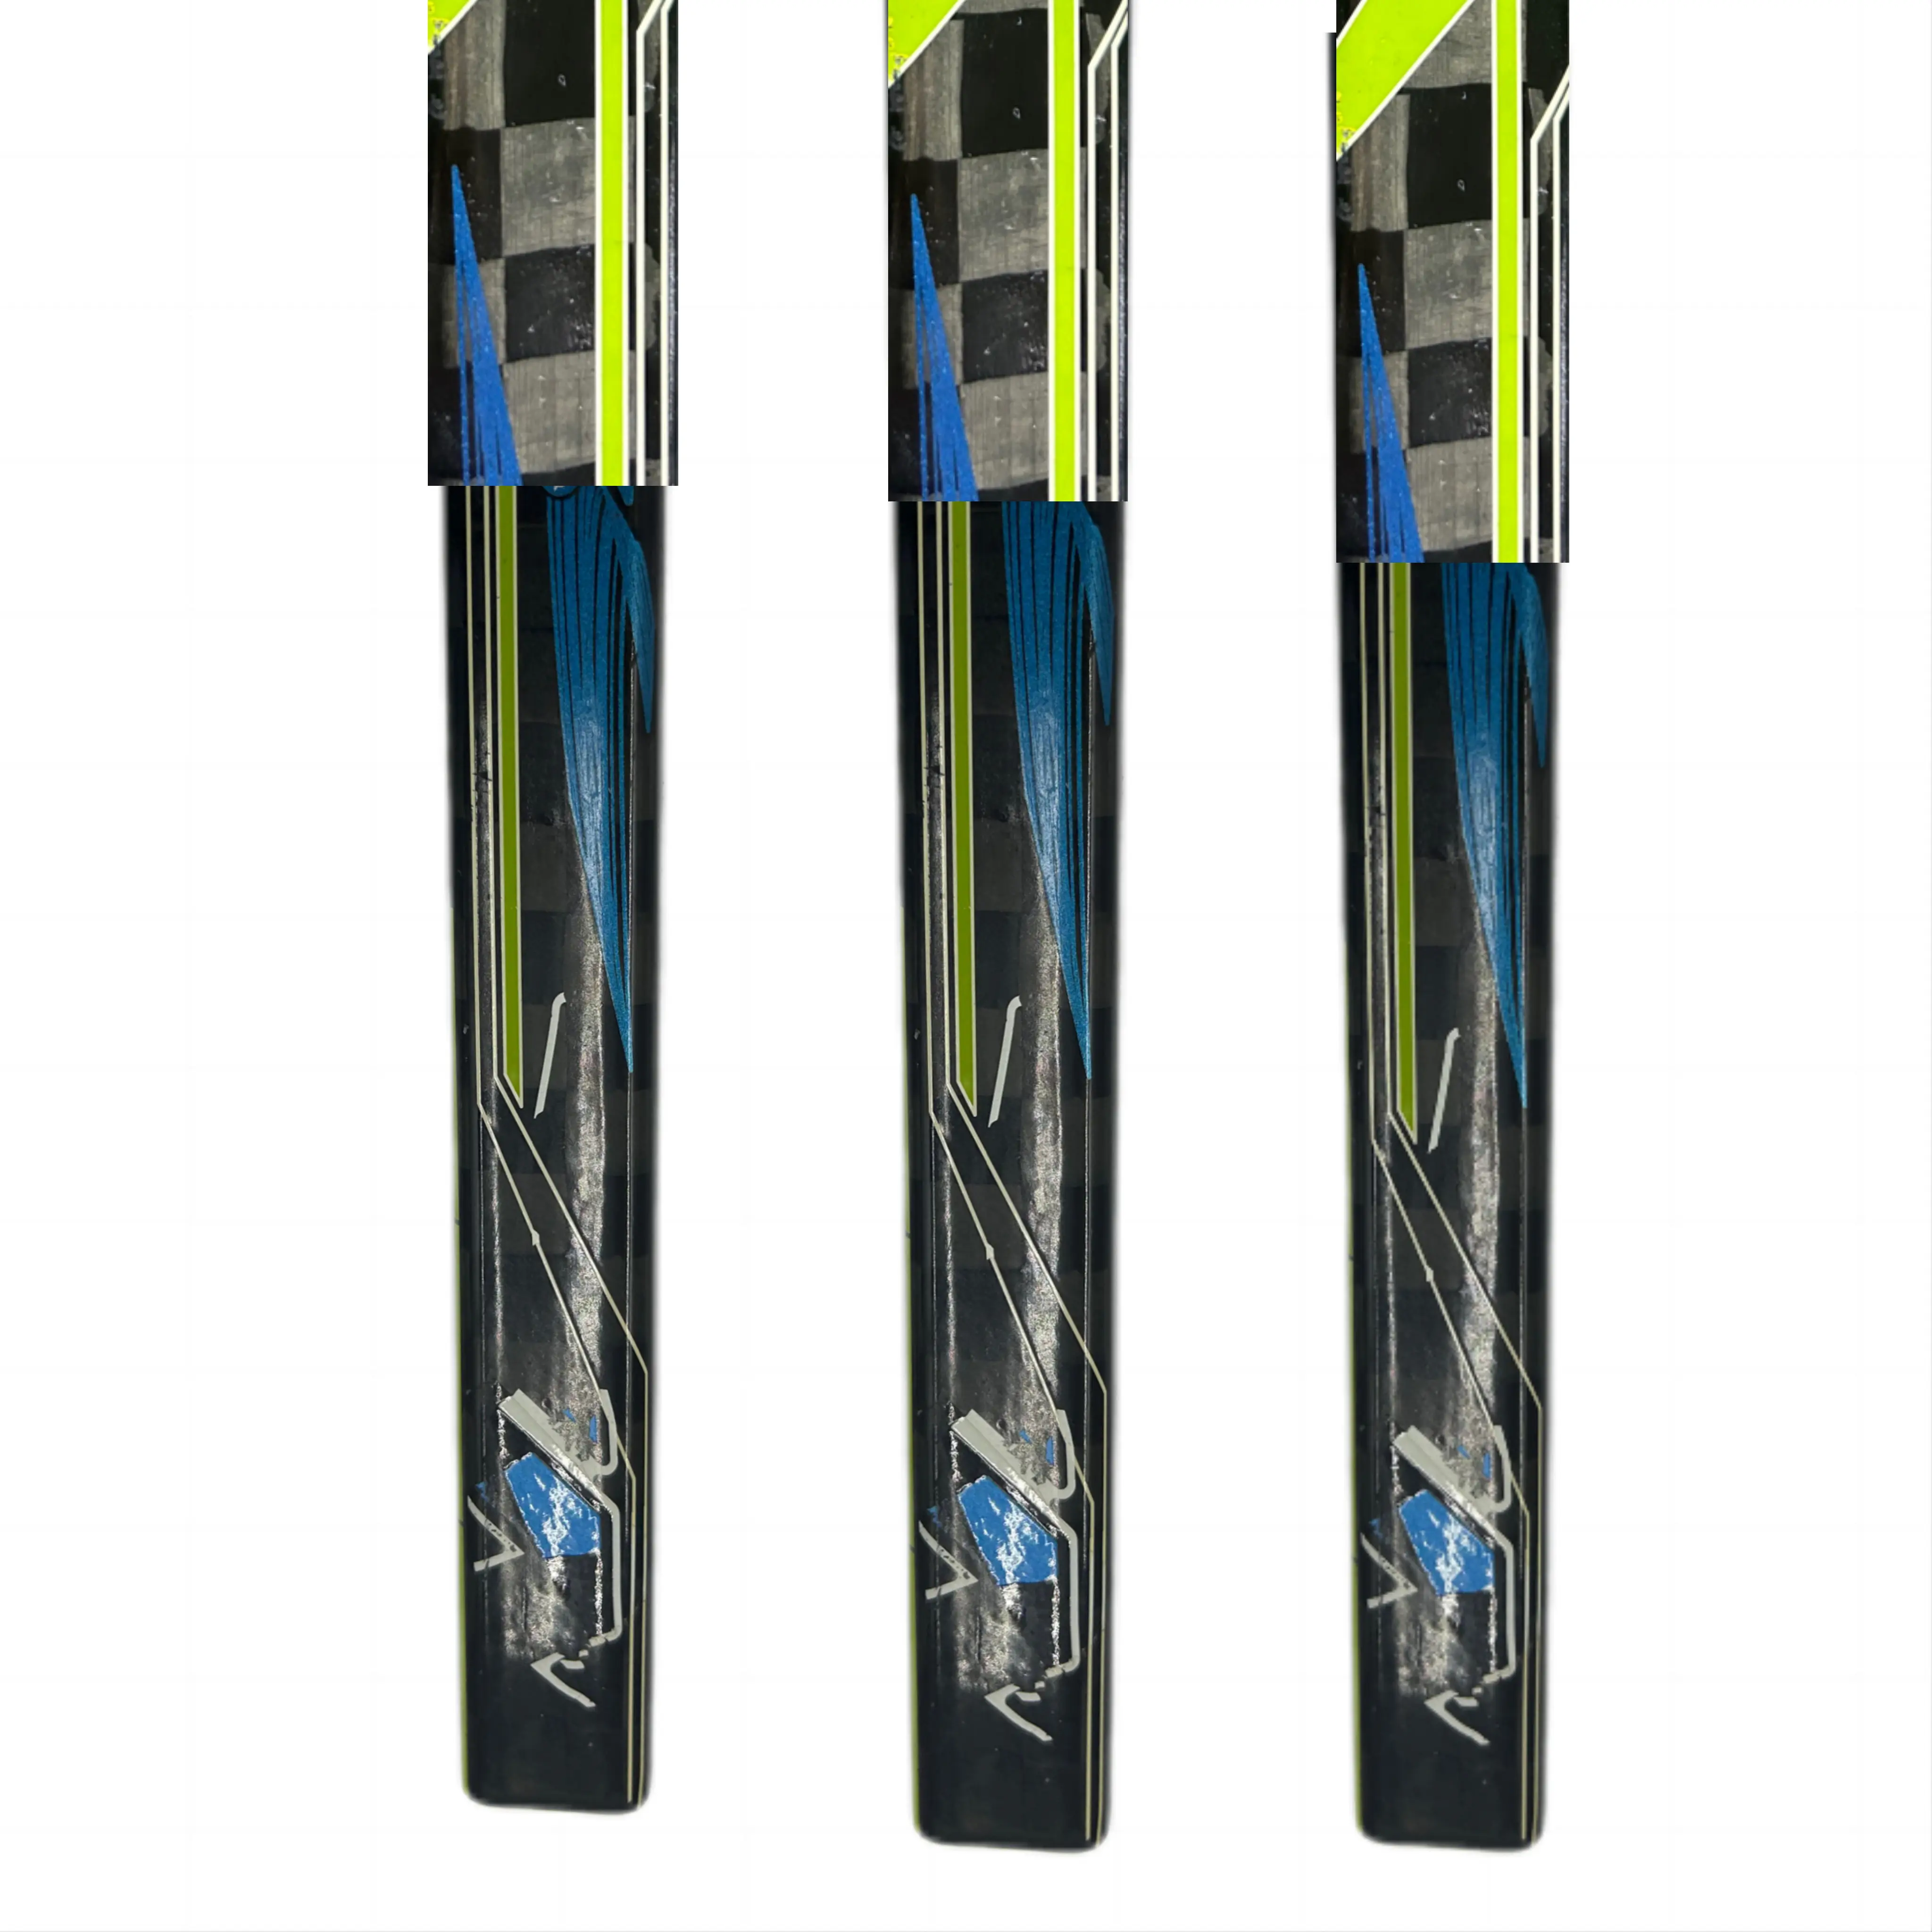 Wholesale Of New Features Carbon Fiber Ice Hockey Sticks Composite Branded Stick Of Hockey Good Hockey Ice Stick